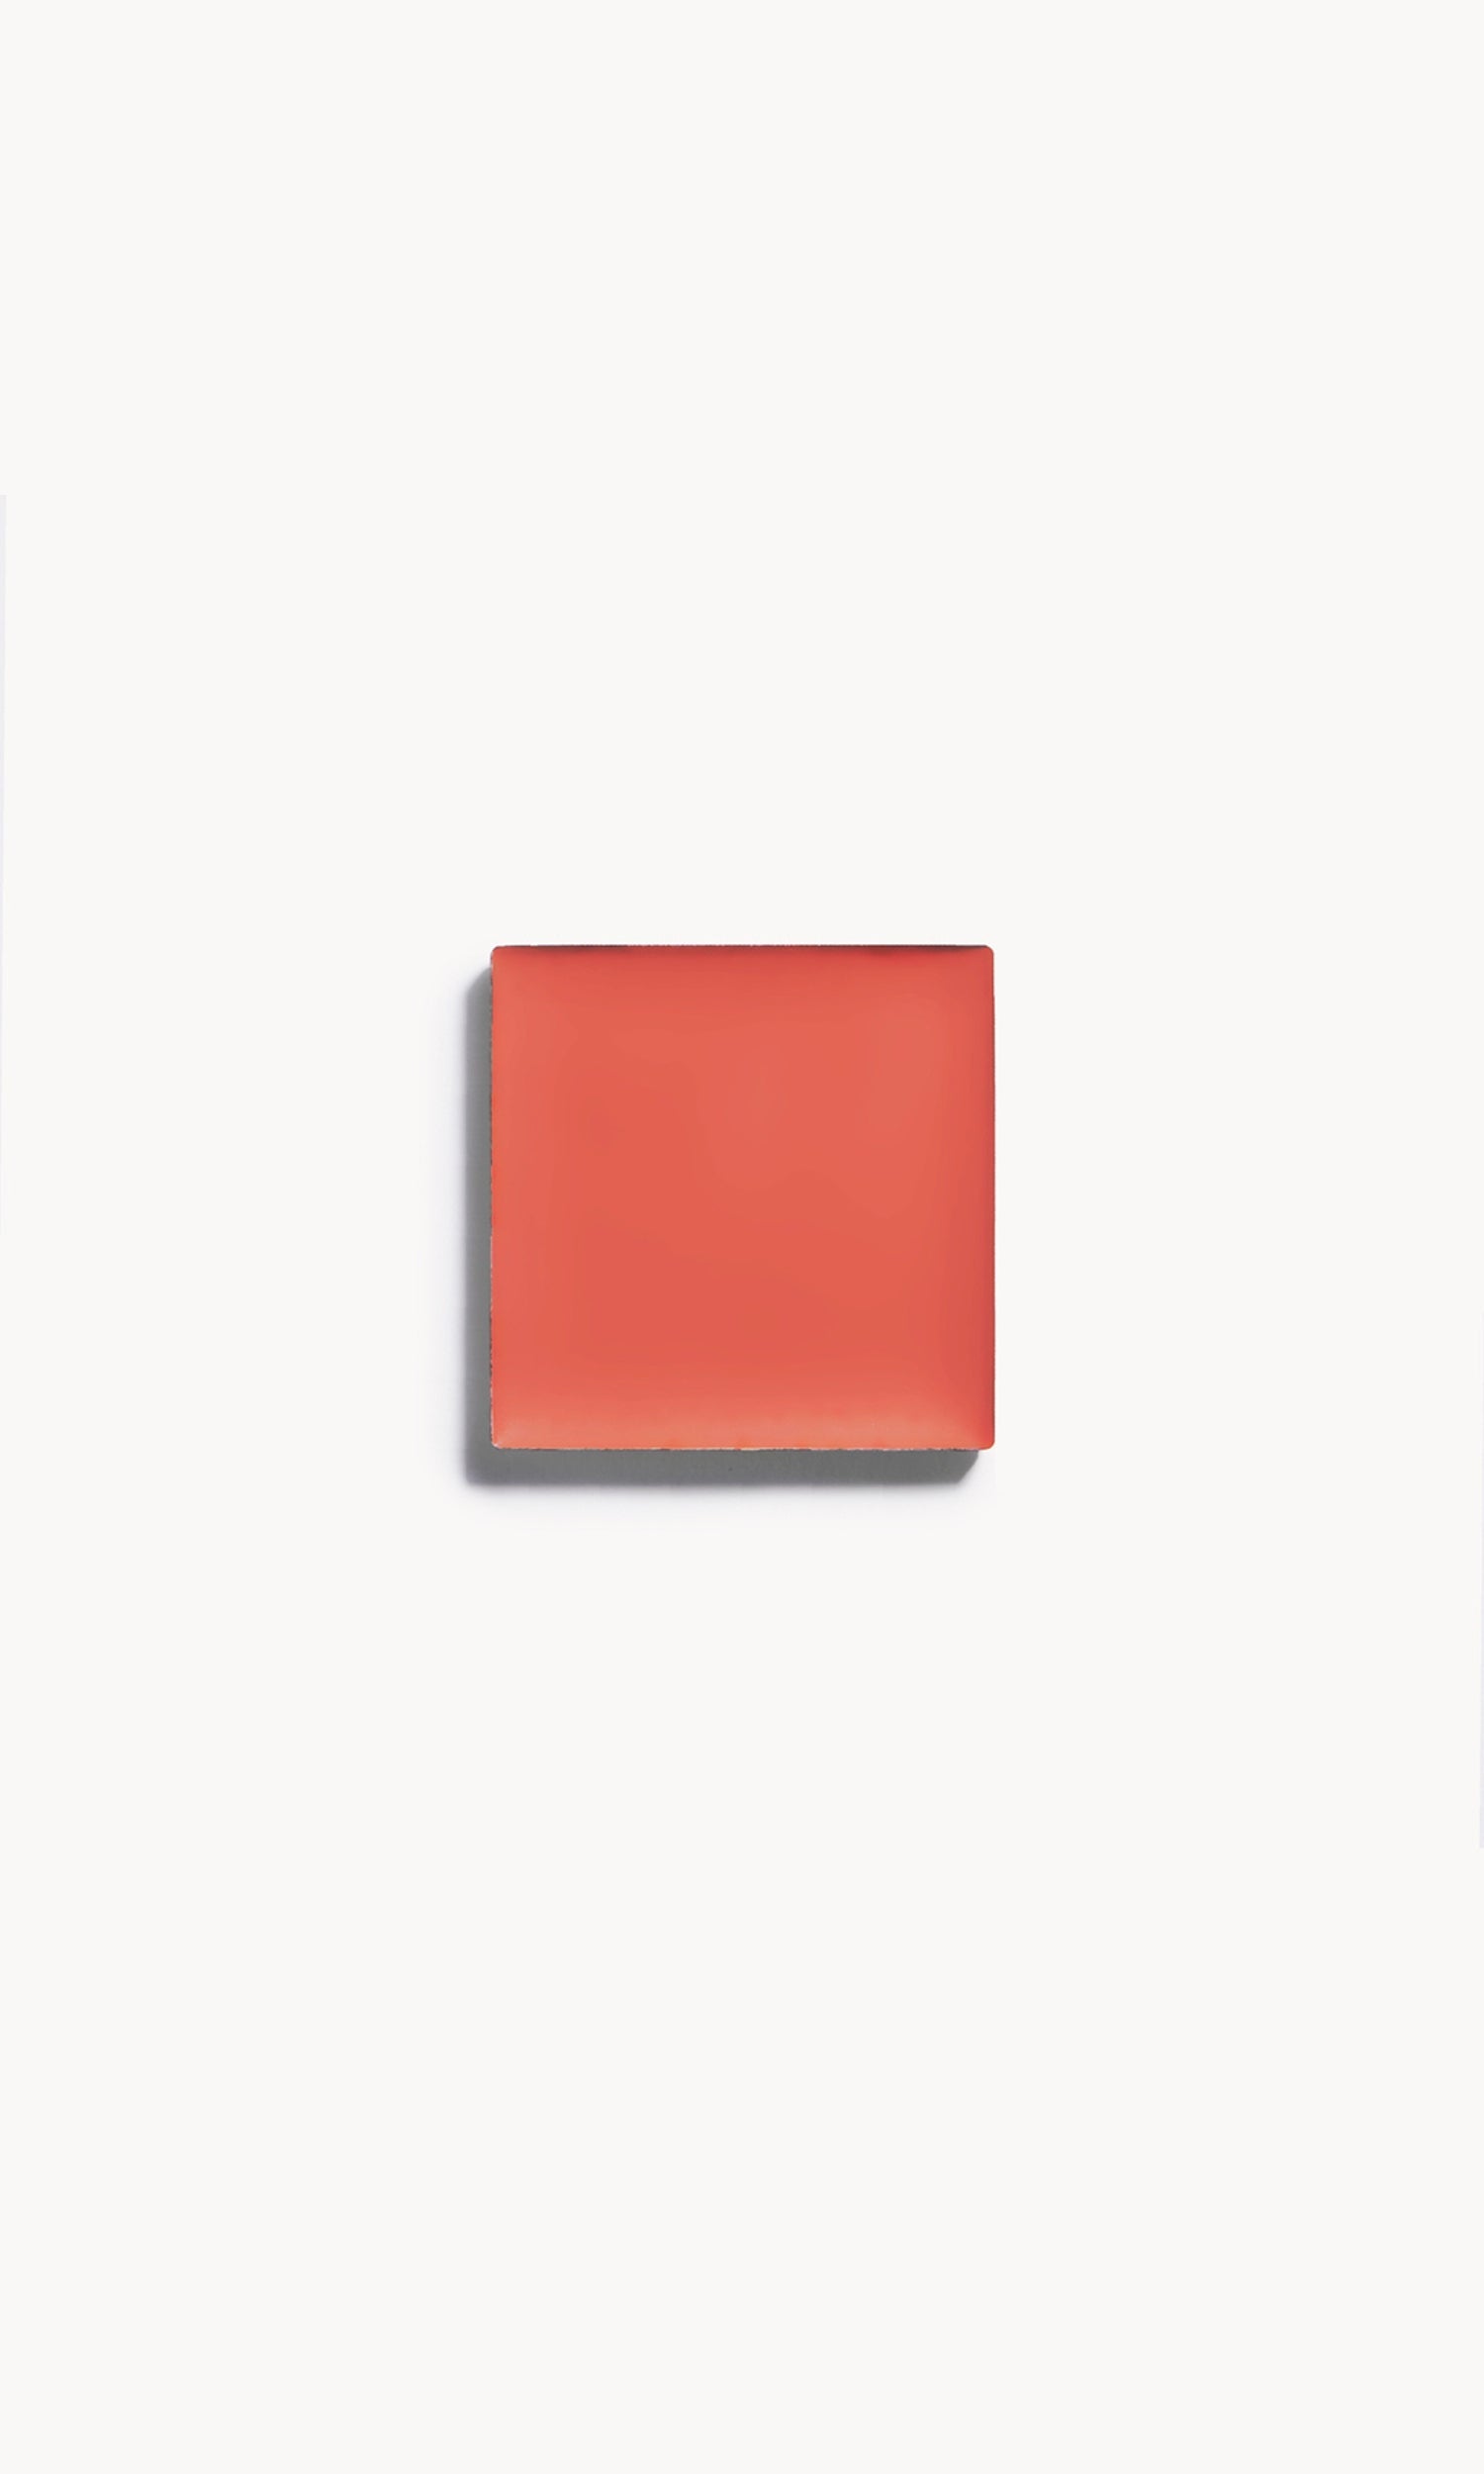 a square of warm coral cream blush on a white background